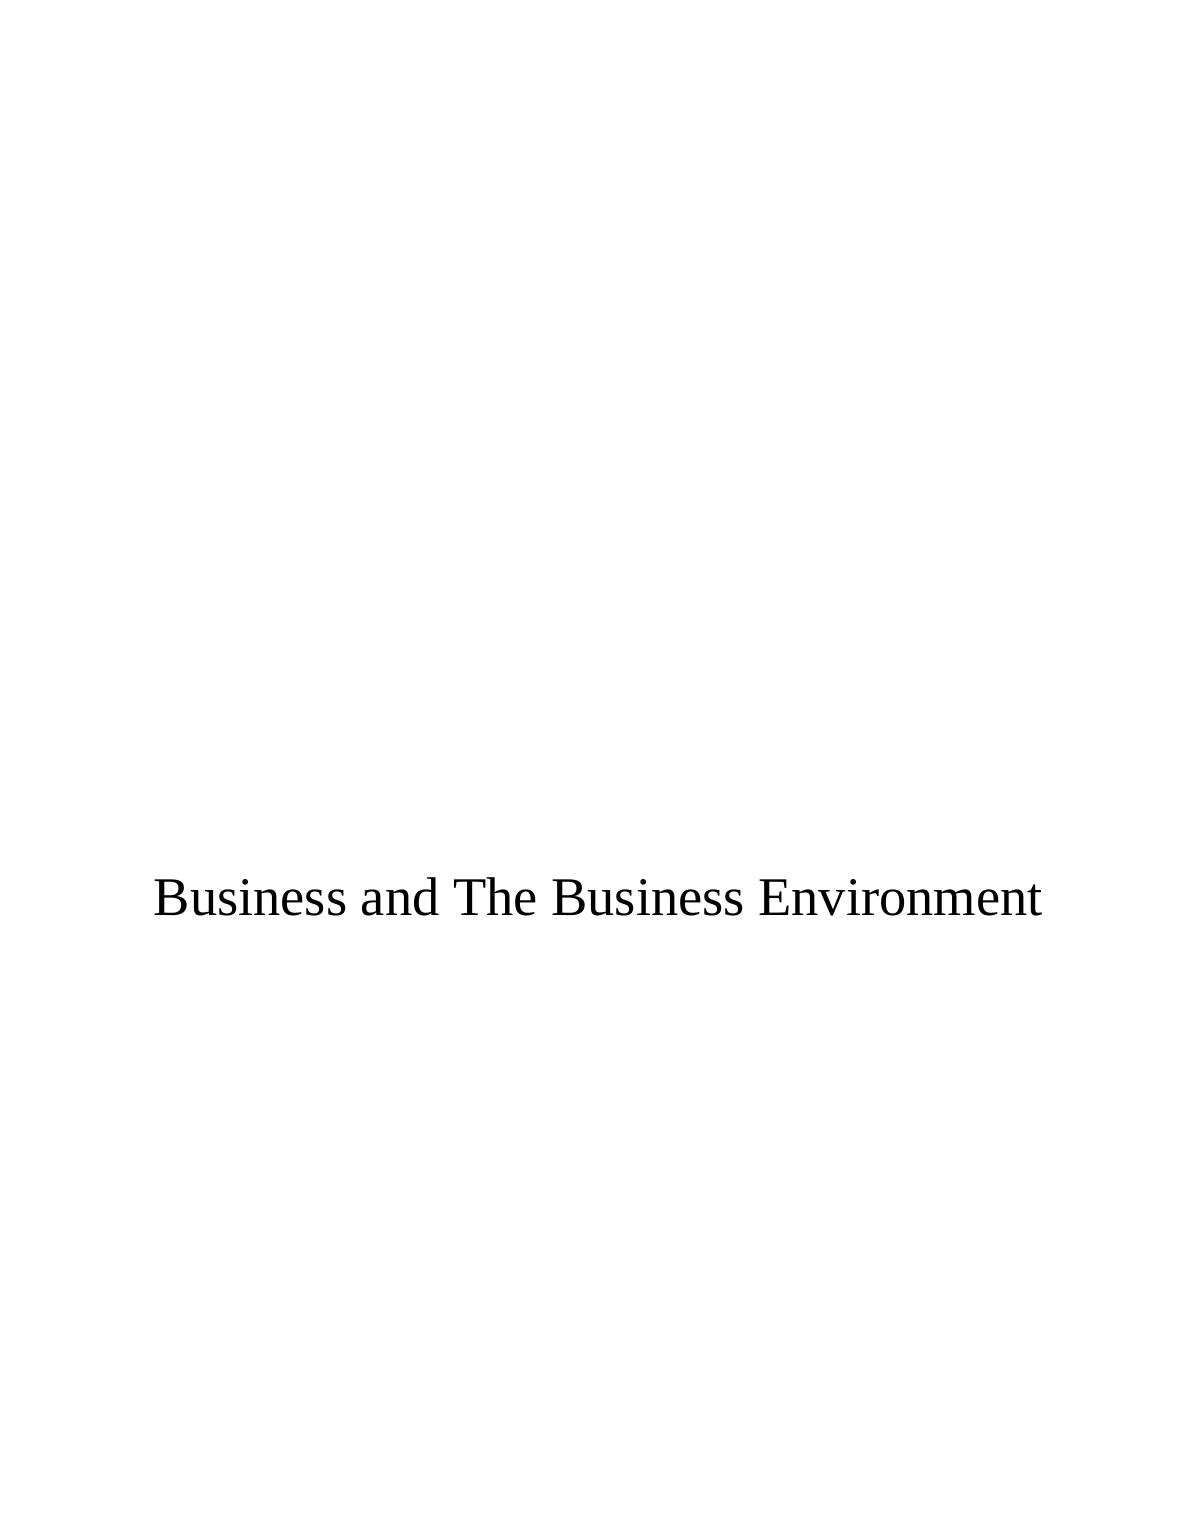 Business and Business Environment of Apple Inc : Assignment_1